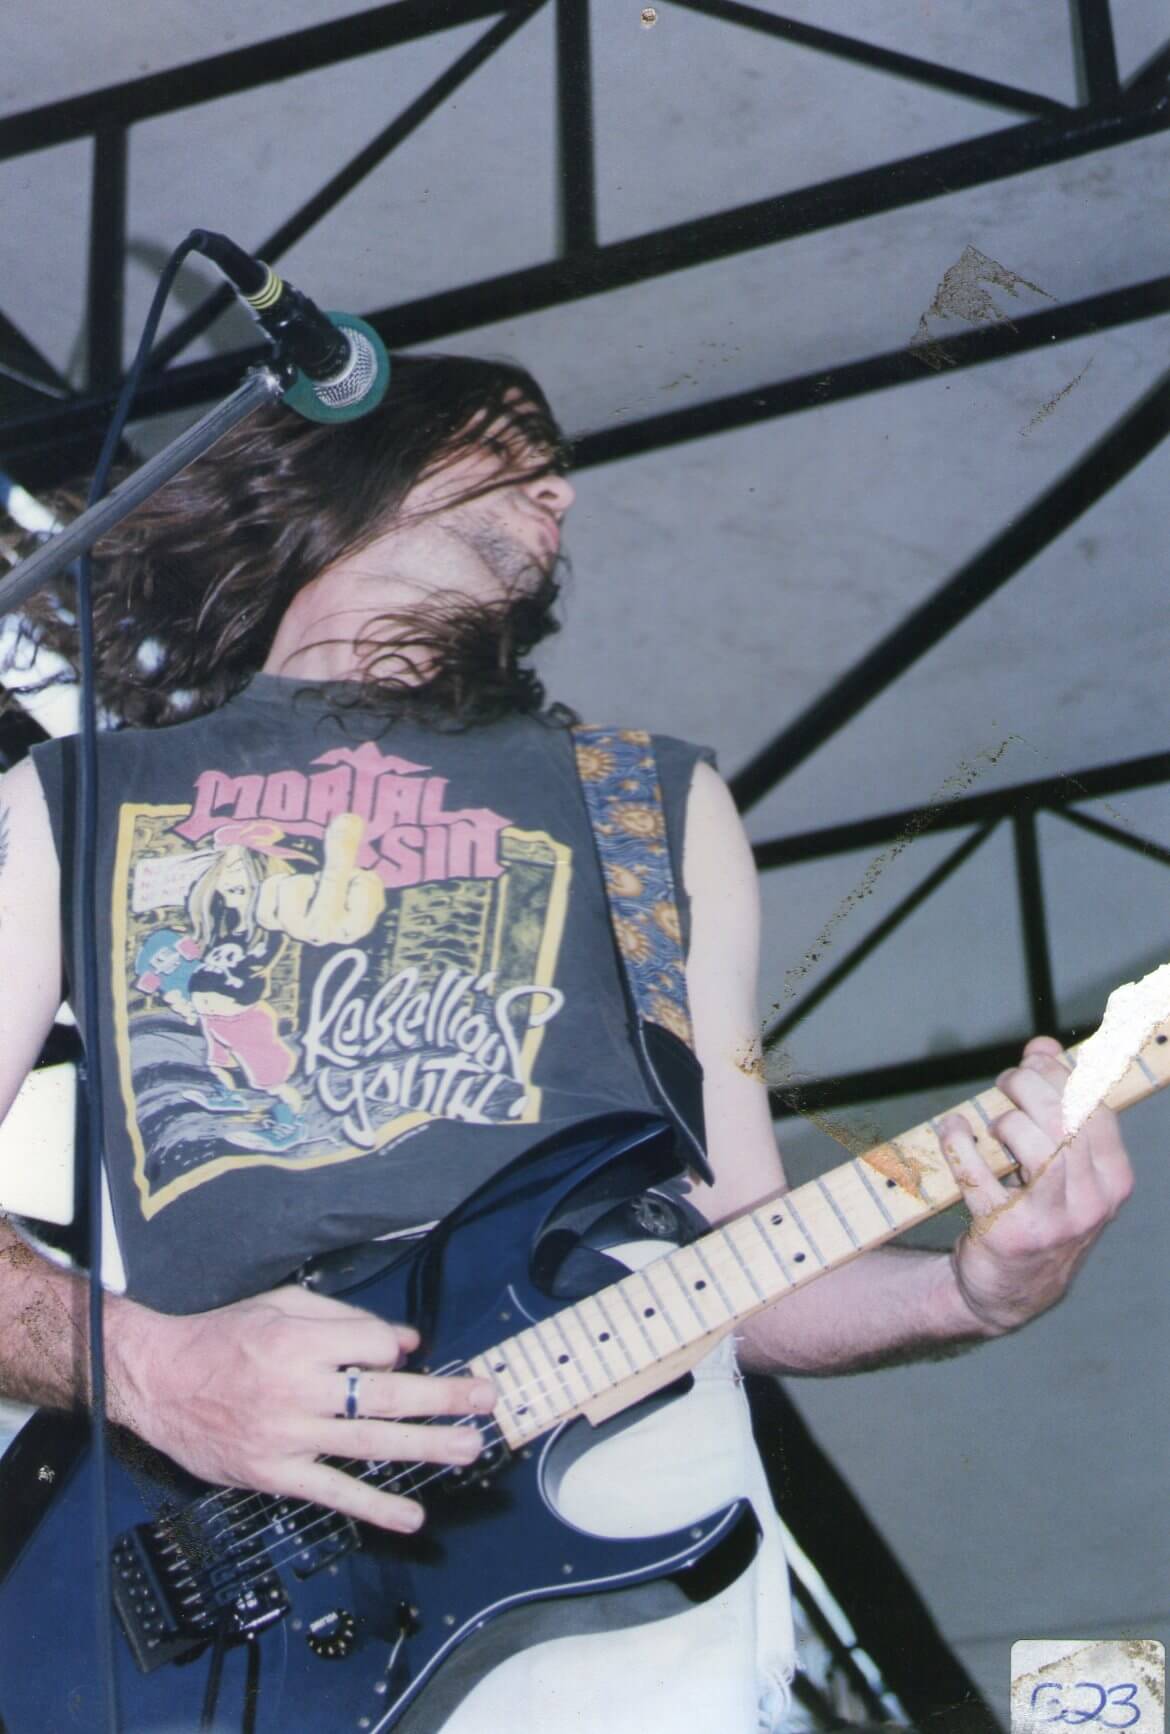 Nikk Carmichael on stage at Manly Beach in the 90s